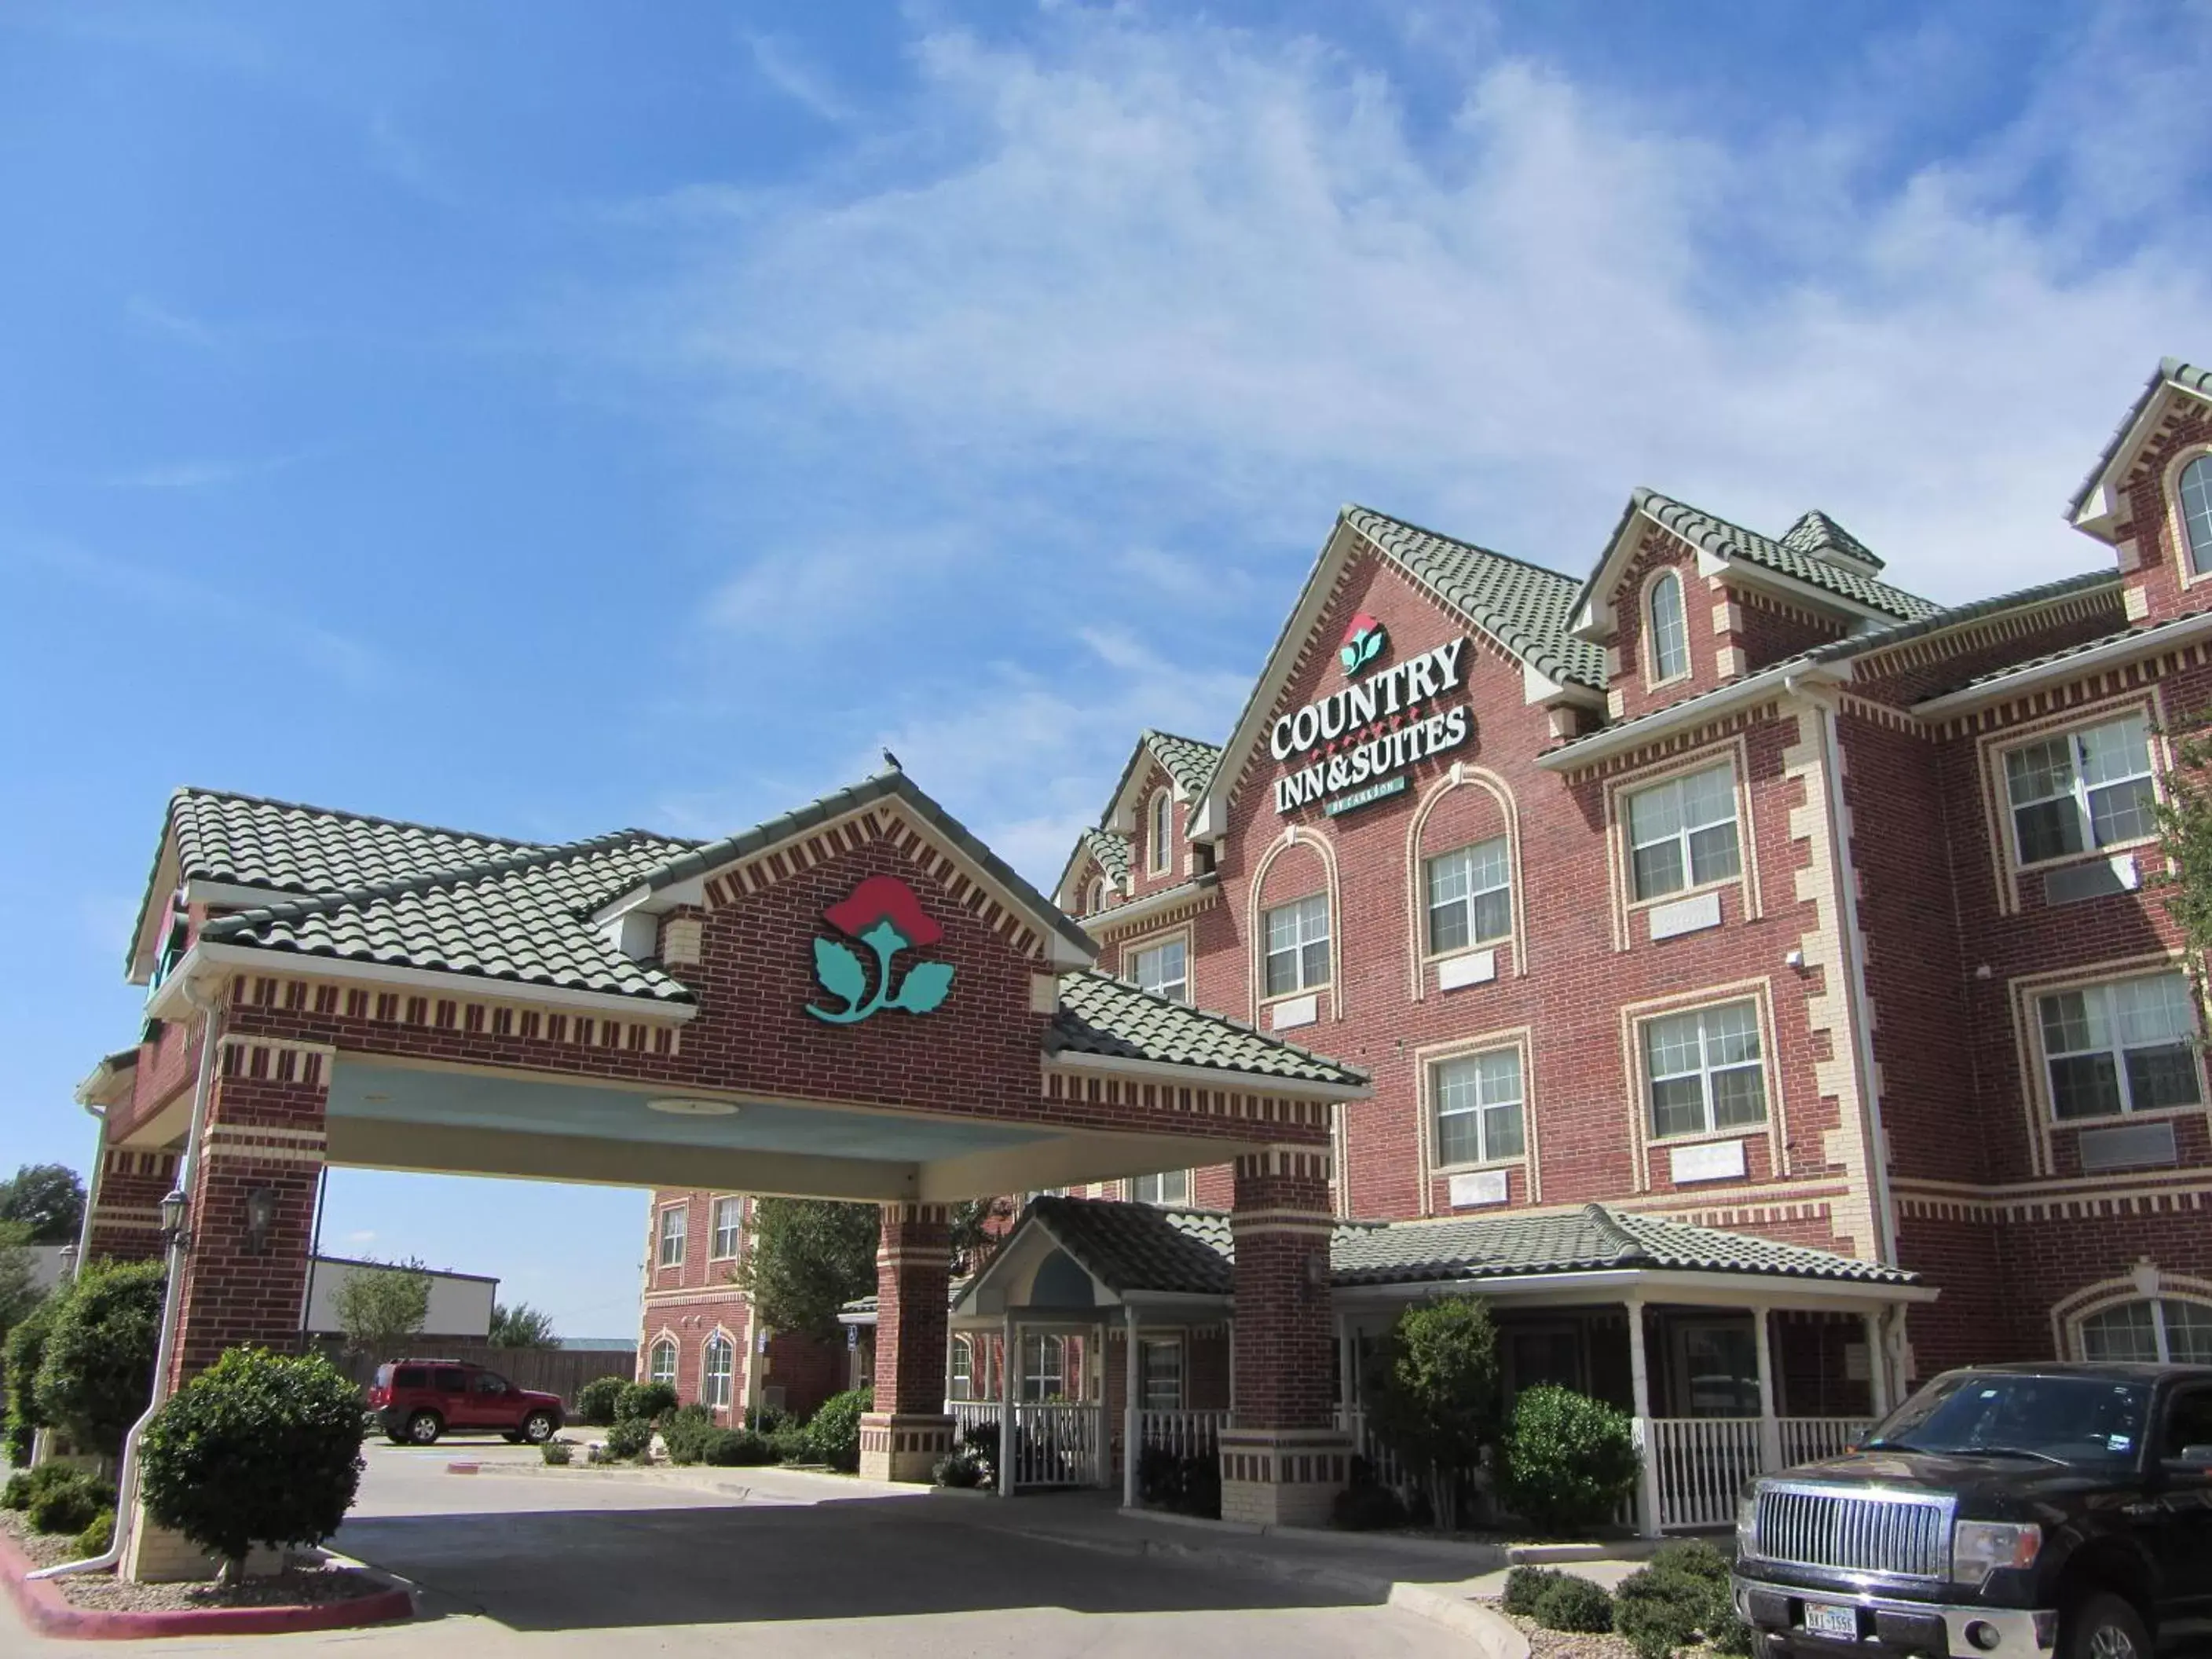 Facade/entrance, Property Building in Country Inn & Suites by Radisson, Amarillo I-40 West, TX